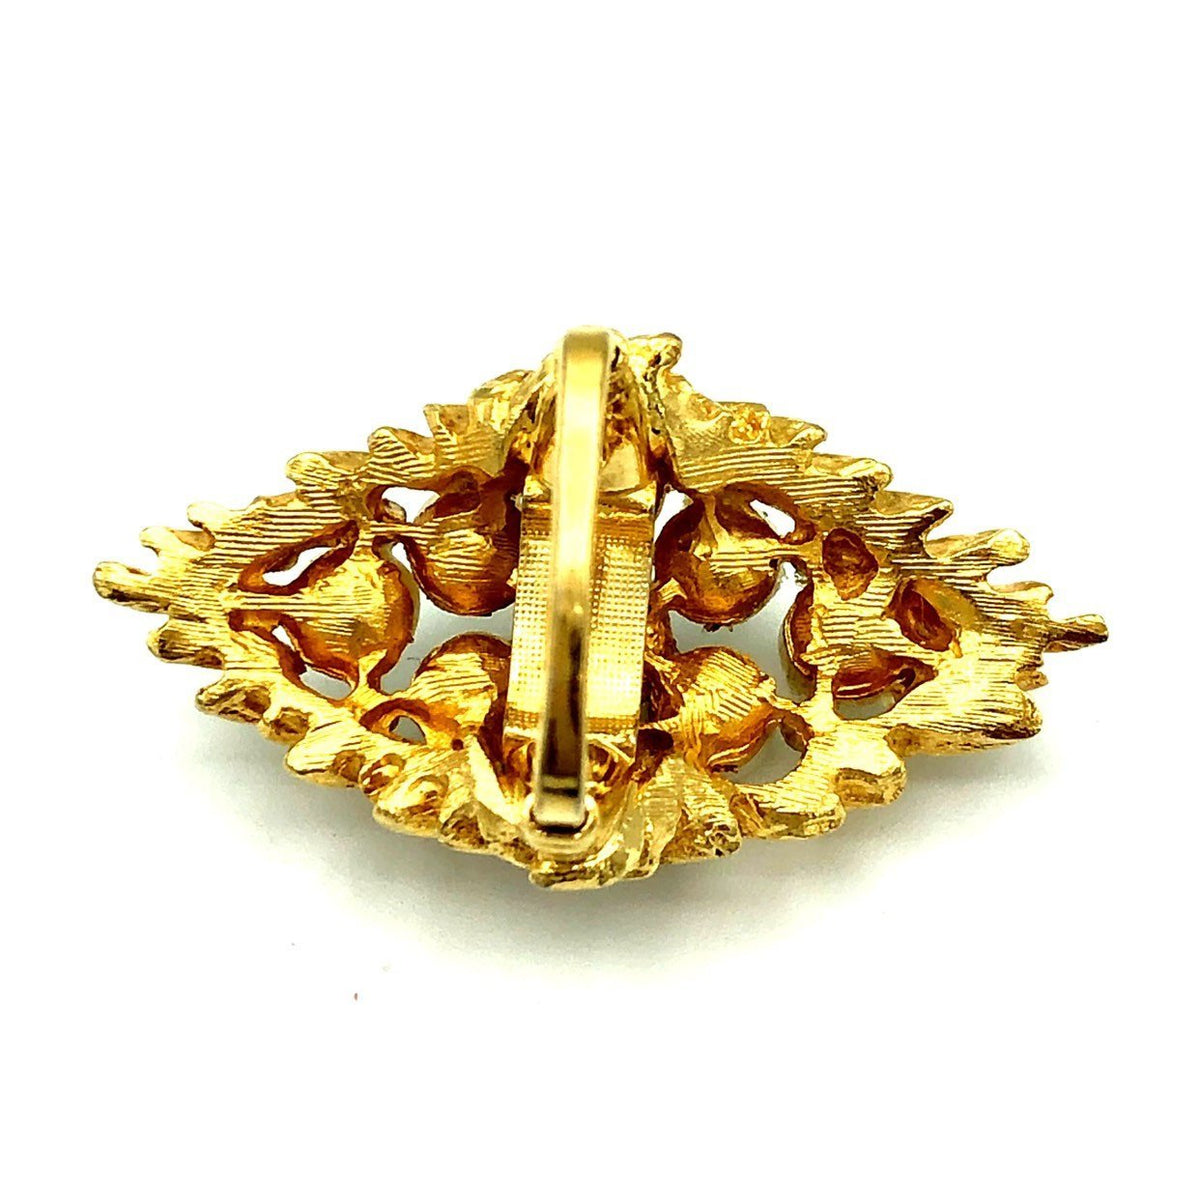 Large Gold Rhinestone & Pearl Vintage Cocktail Ring - 24 Wishes Vintage Jewelry